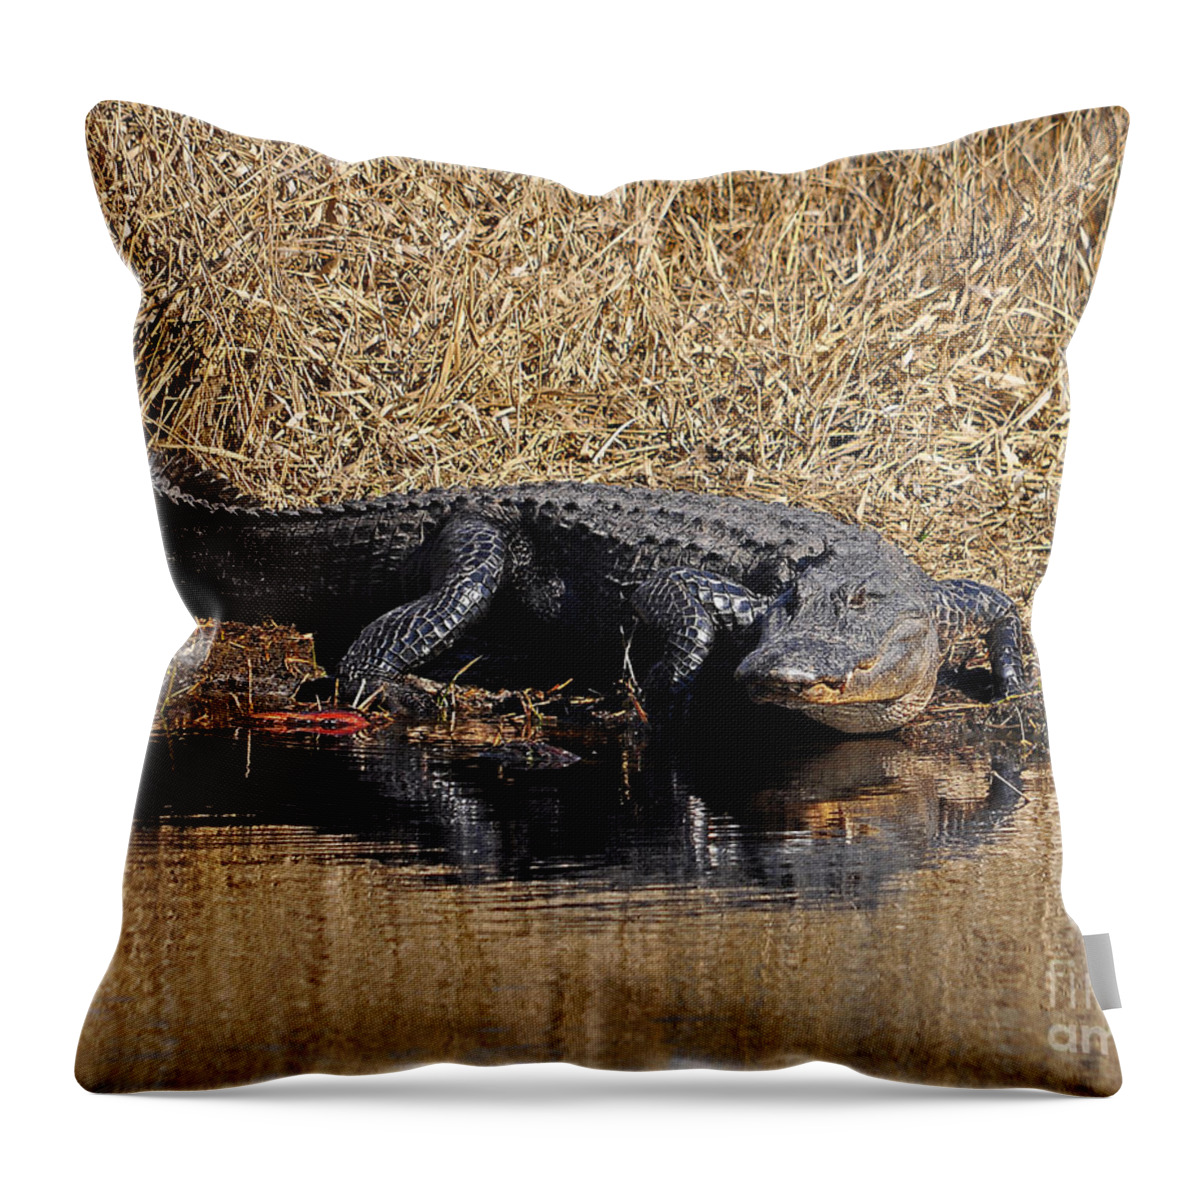 Alligator Throw Pillow featuring the photograph Ravenous Reptile by Al Powell Photography USA